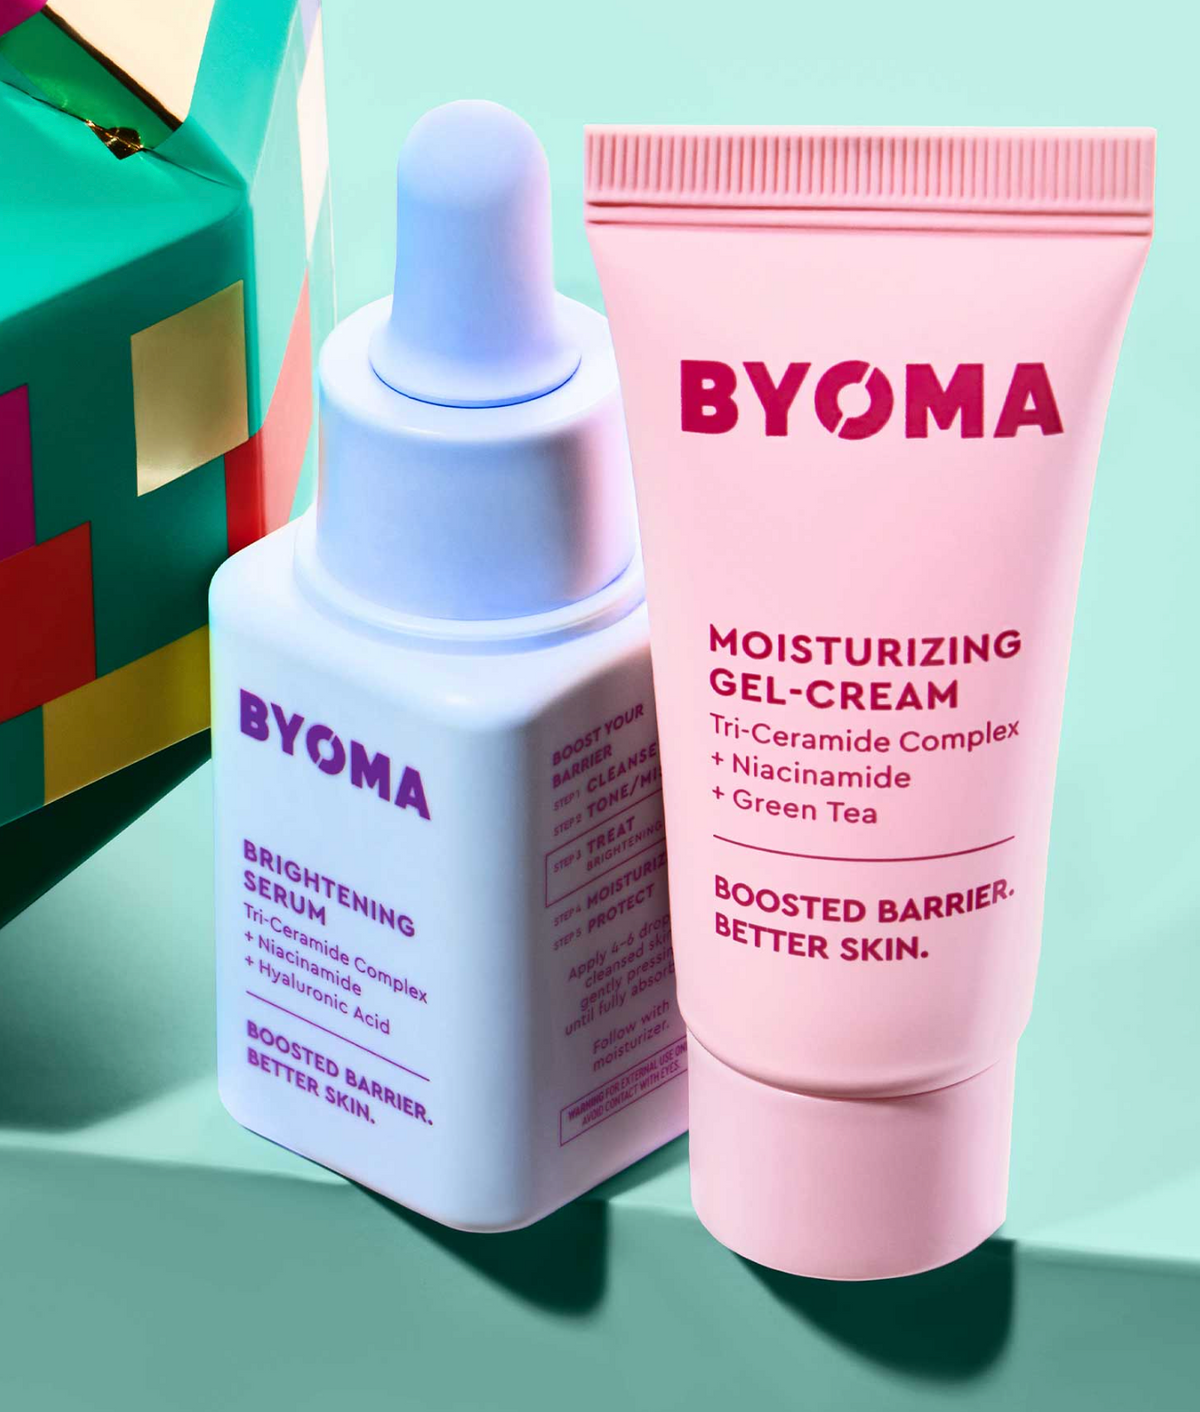 BYOMA BRIGHTENING DUO BAUBLE Face Moisturizers BYOMA   